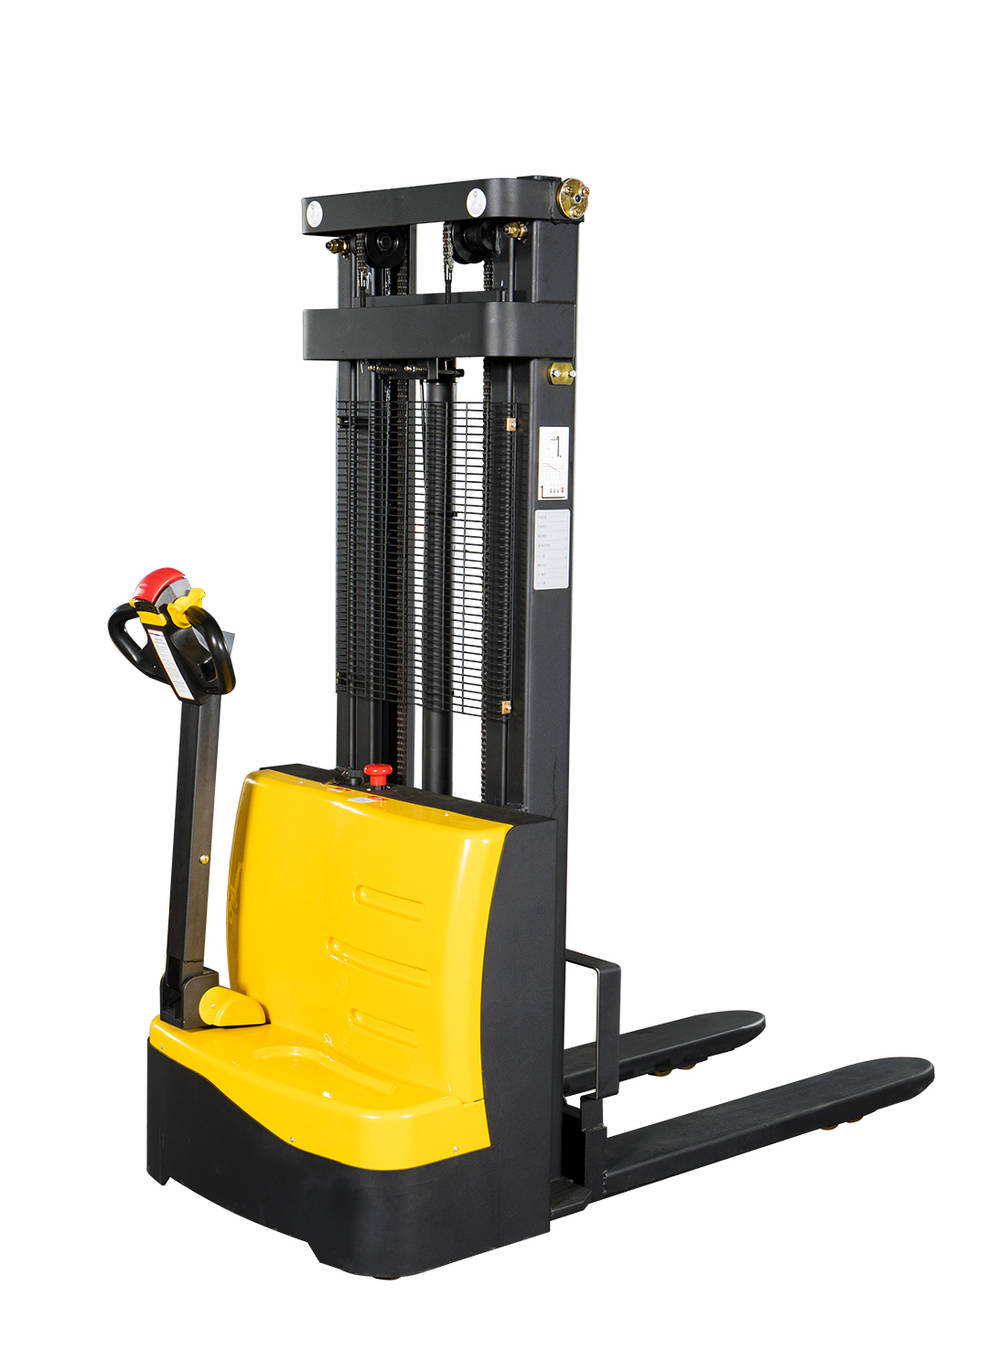 Electric Powered Pallet Stacker Lifter Supplier LS-12 15S-I